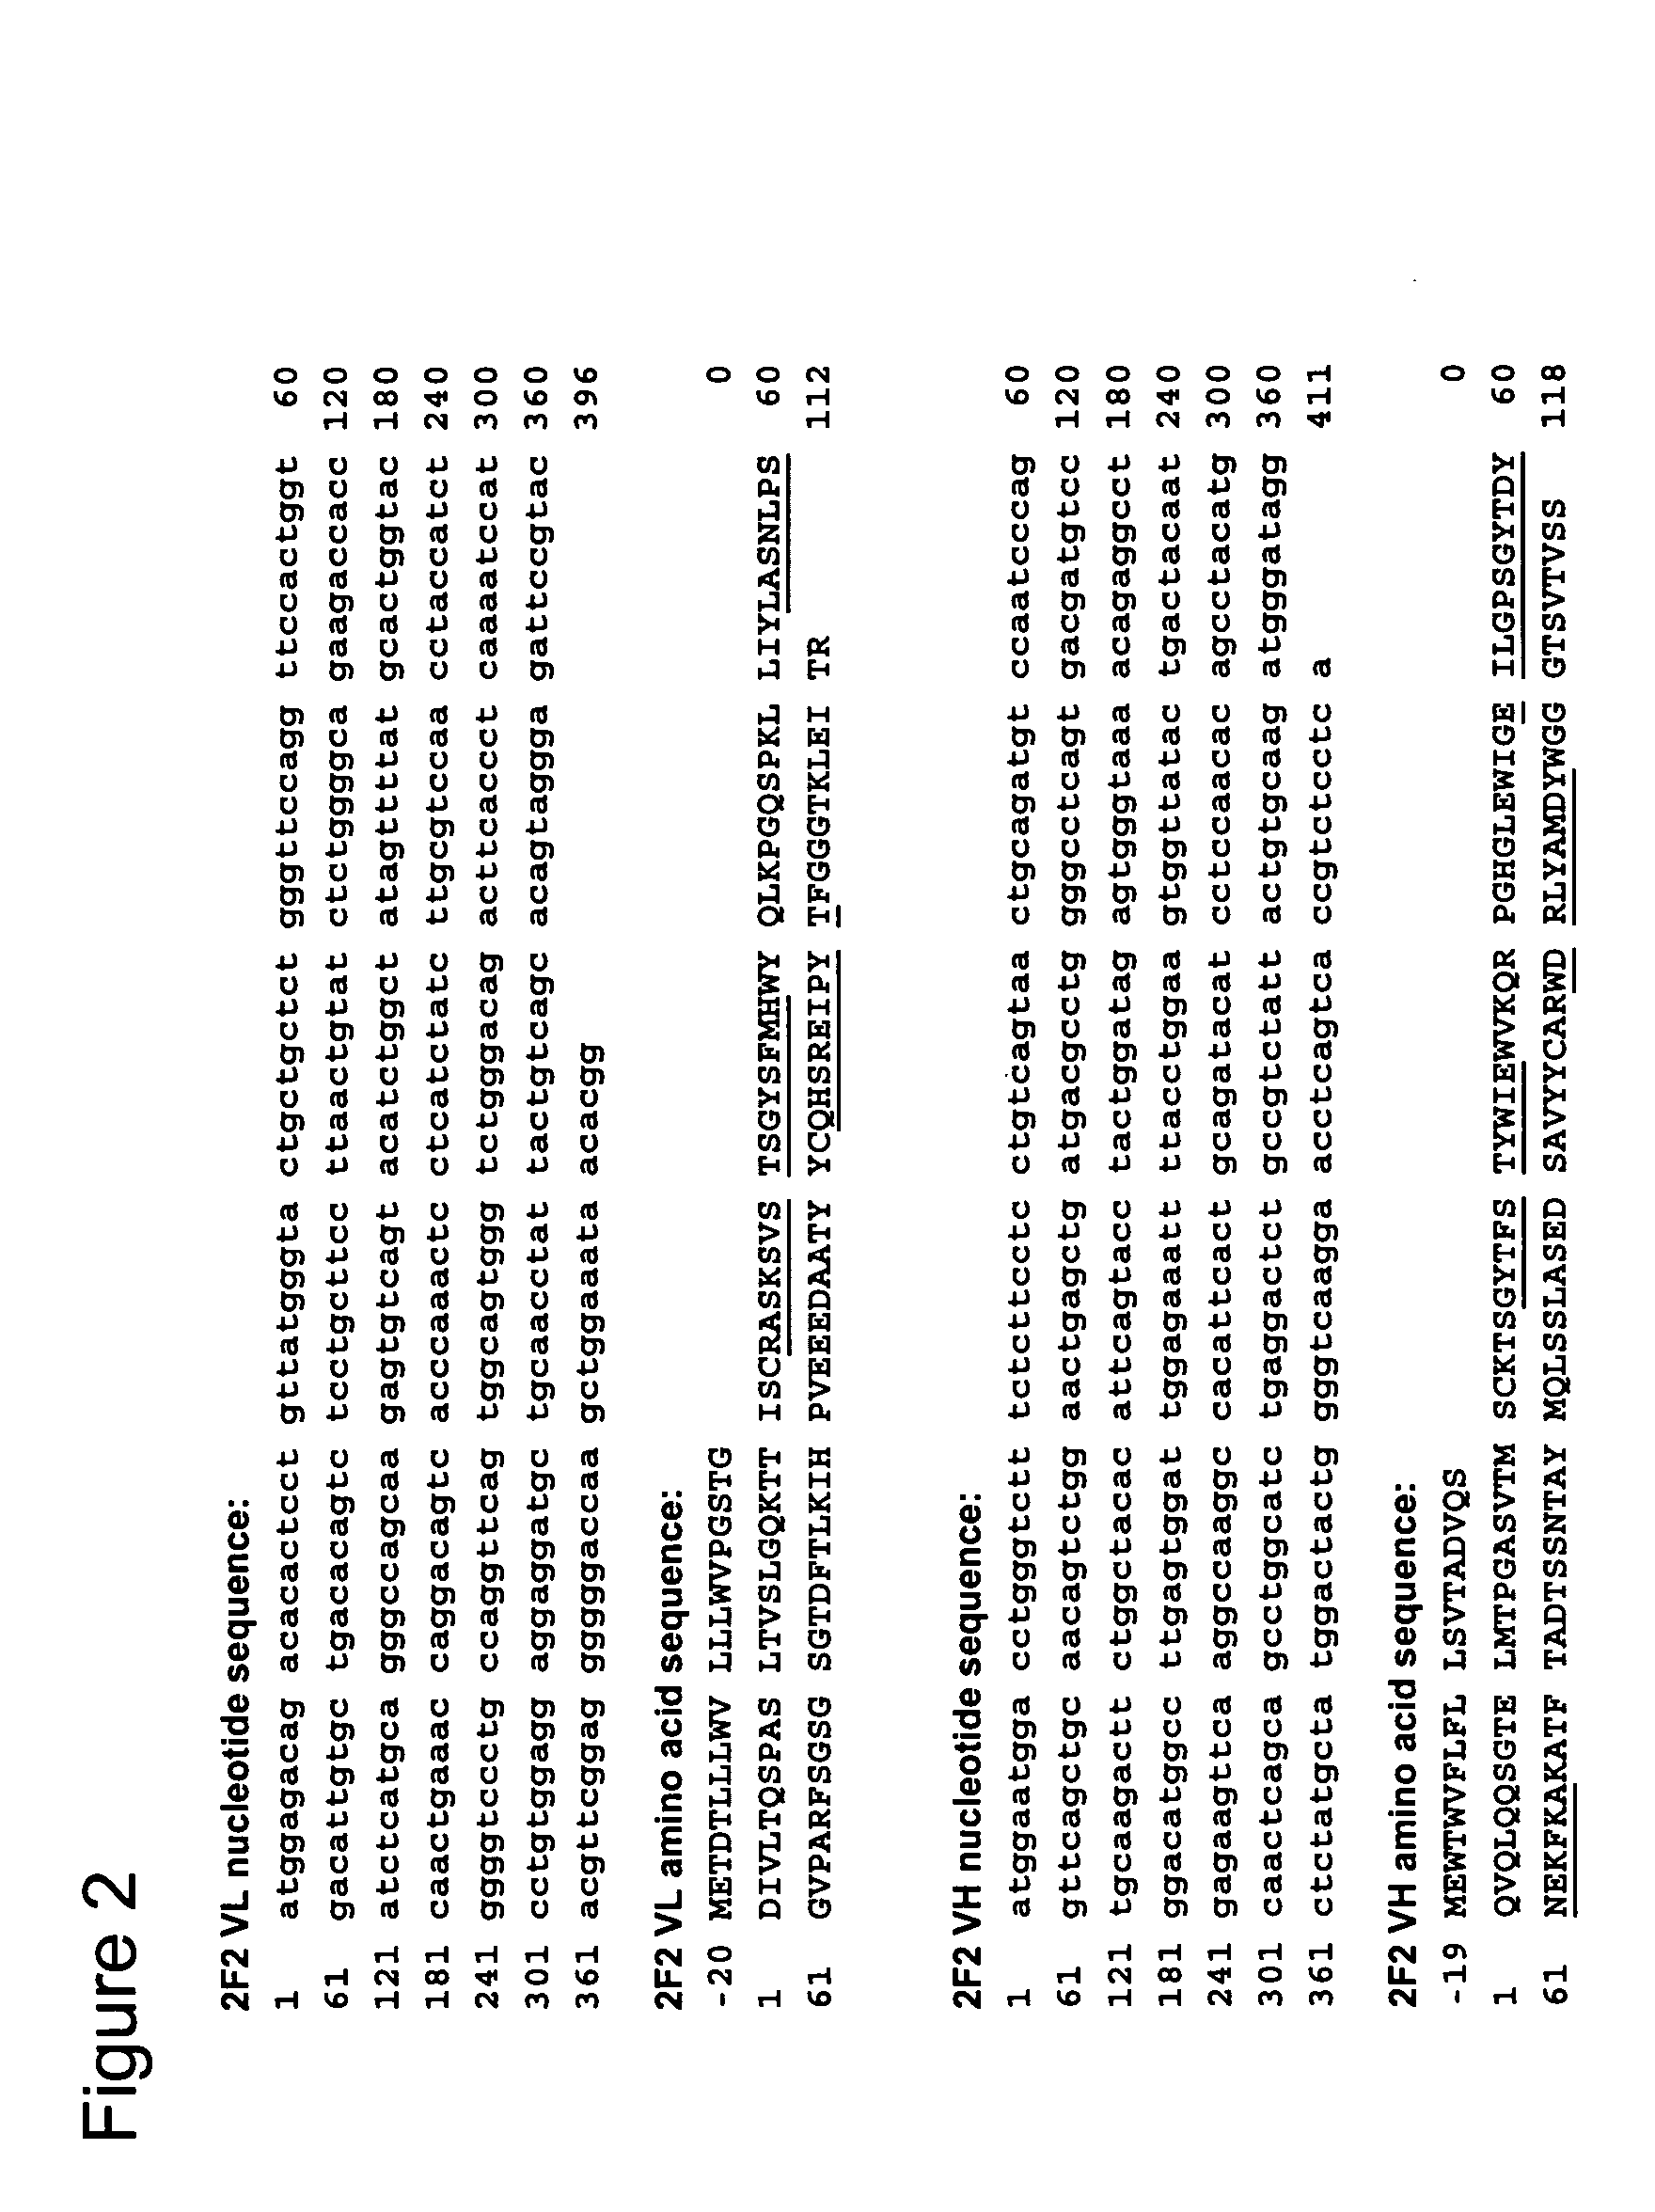 Anti-CD70 antibody and its use for the treatment and prevention of cancer and immune disorders